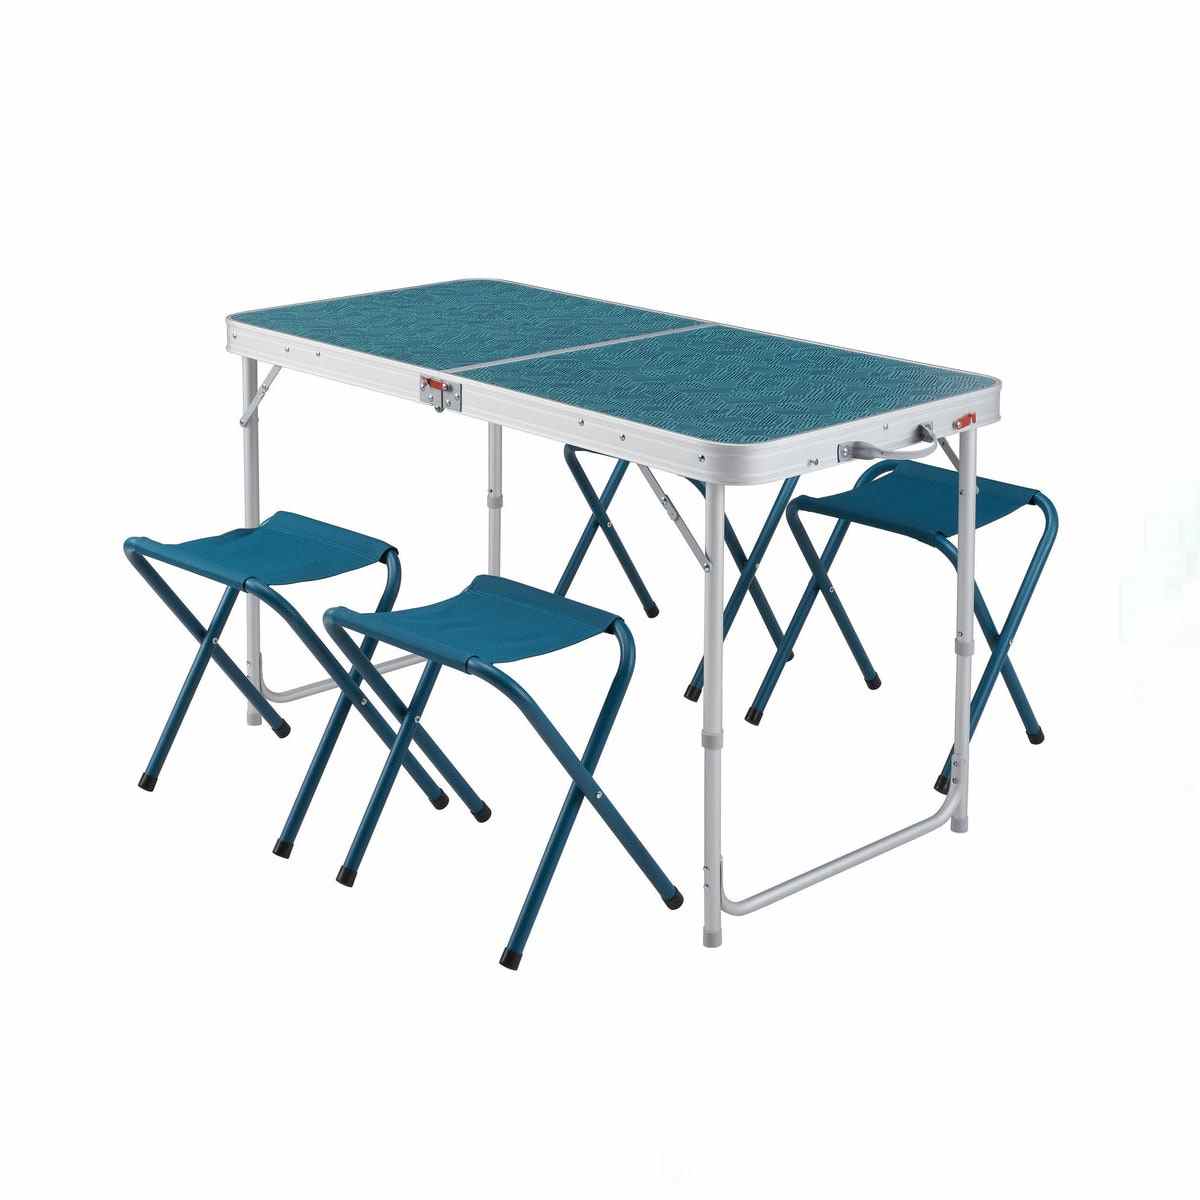 Turquoise and silver Decathlon Camping Folding Table with four stools on white background